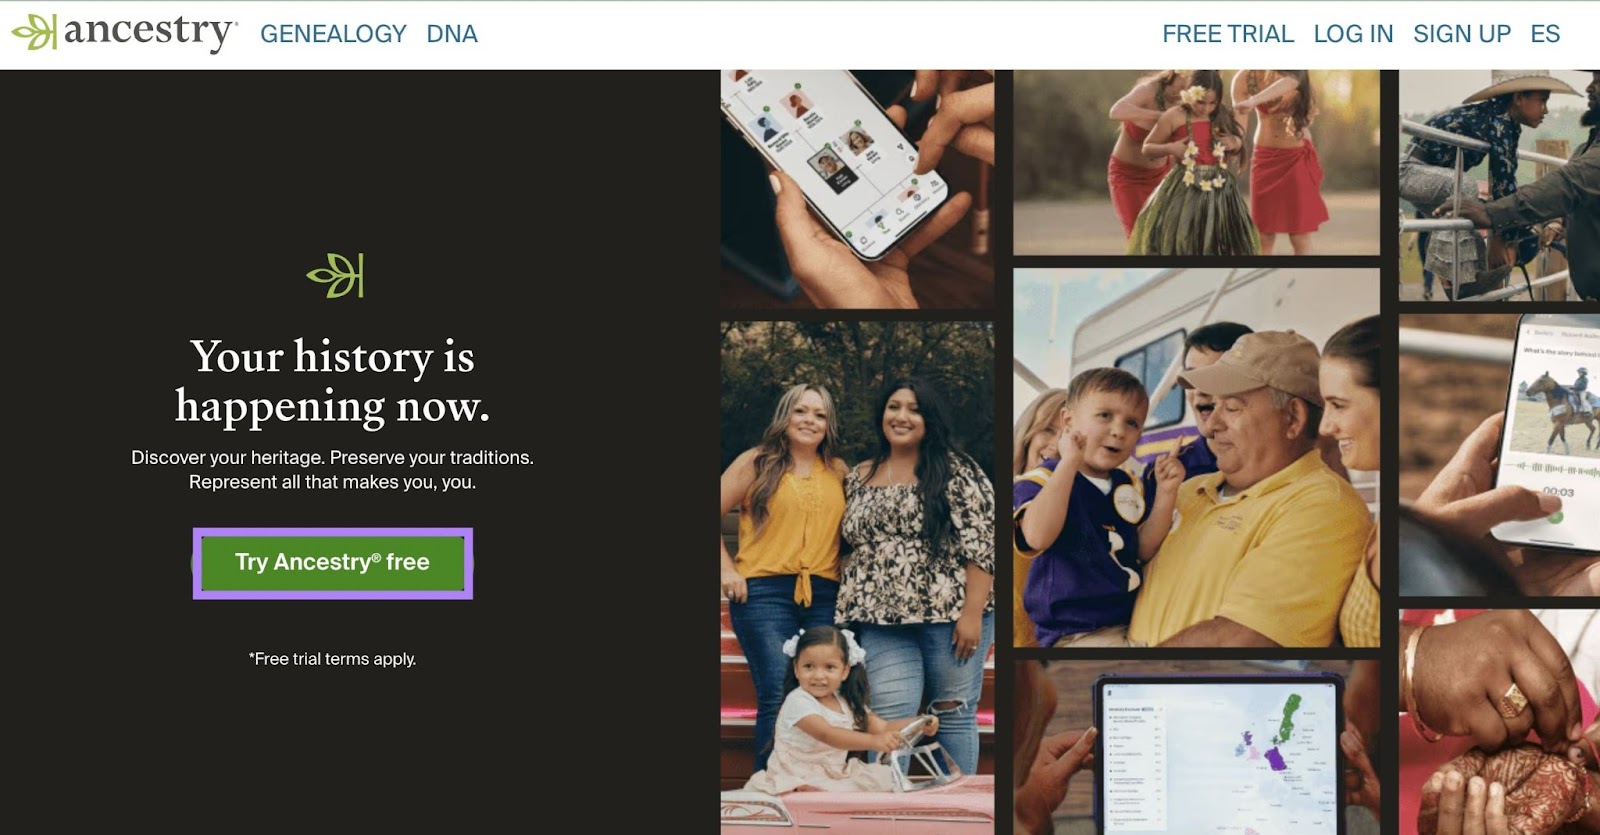 Family photo collage alongside highlighted Ancestry DNA test CTA